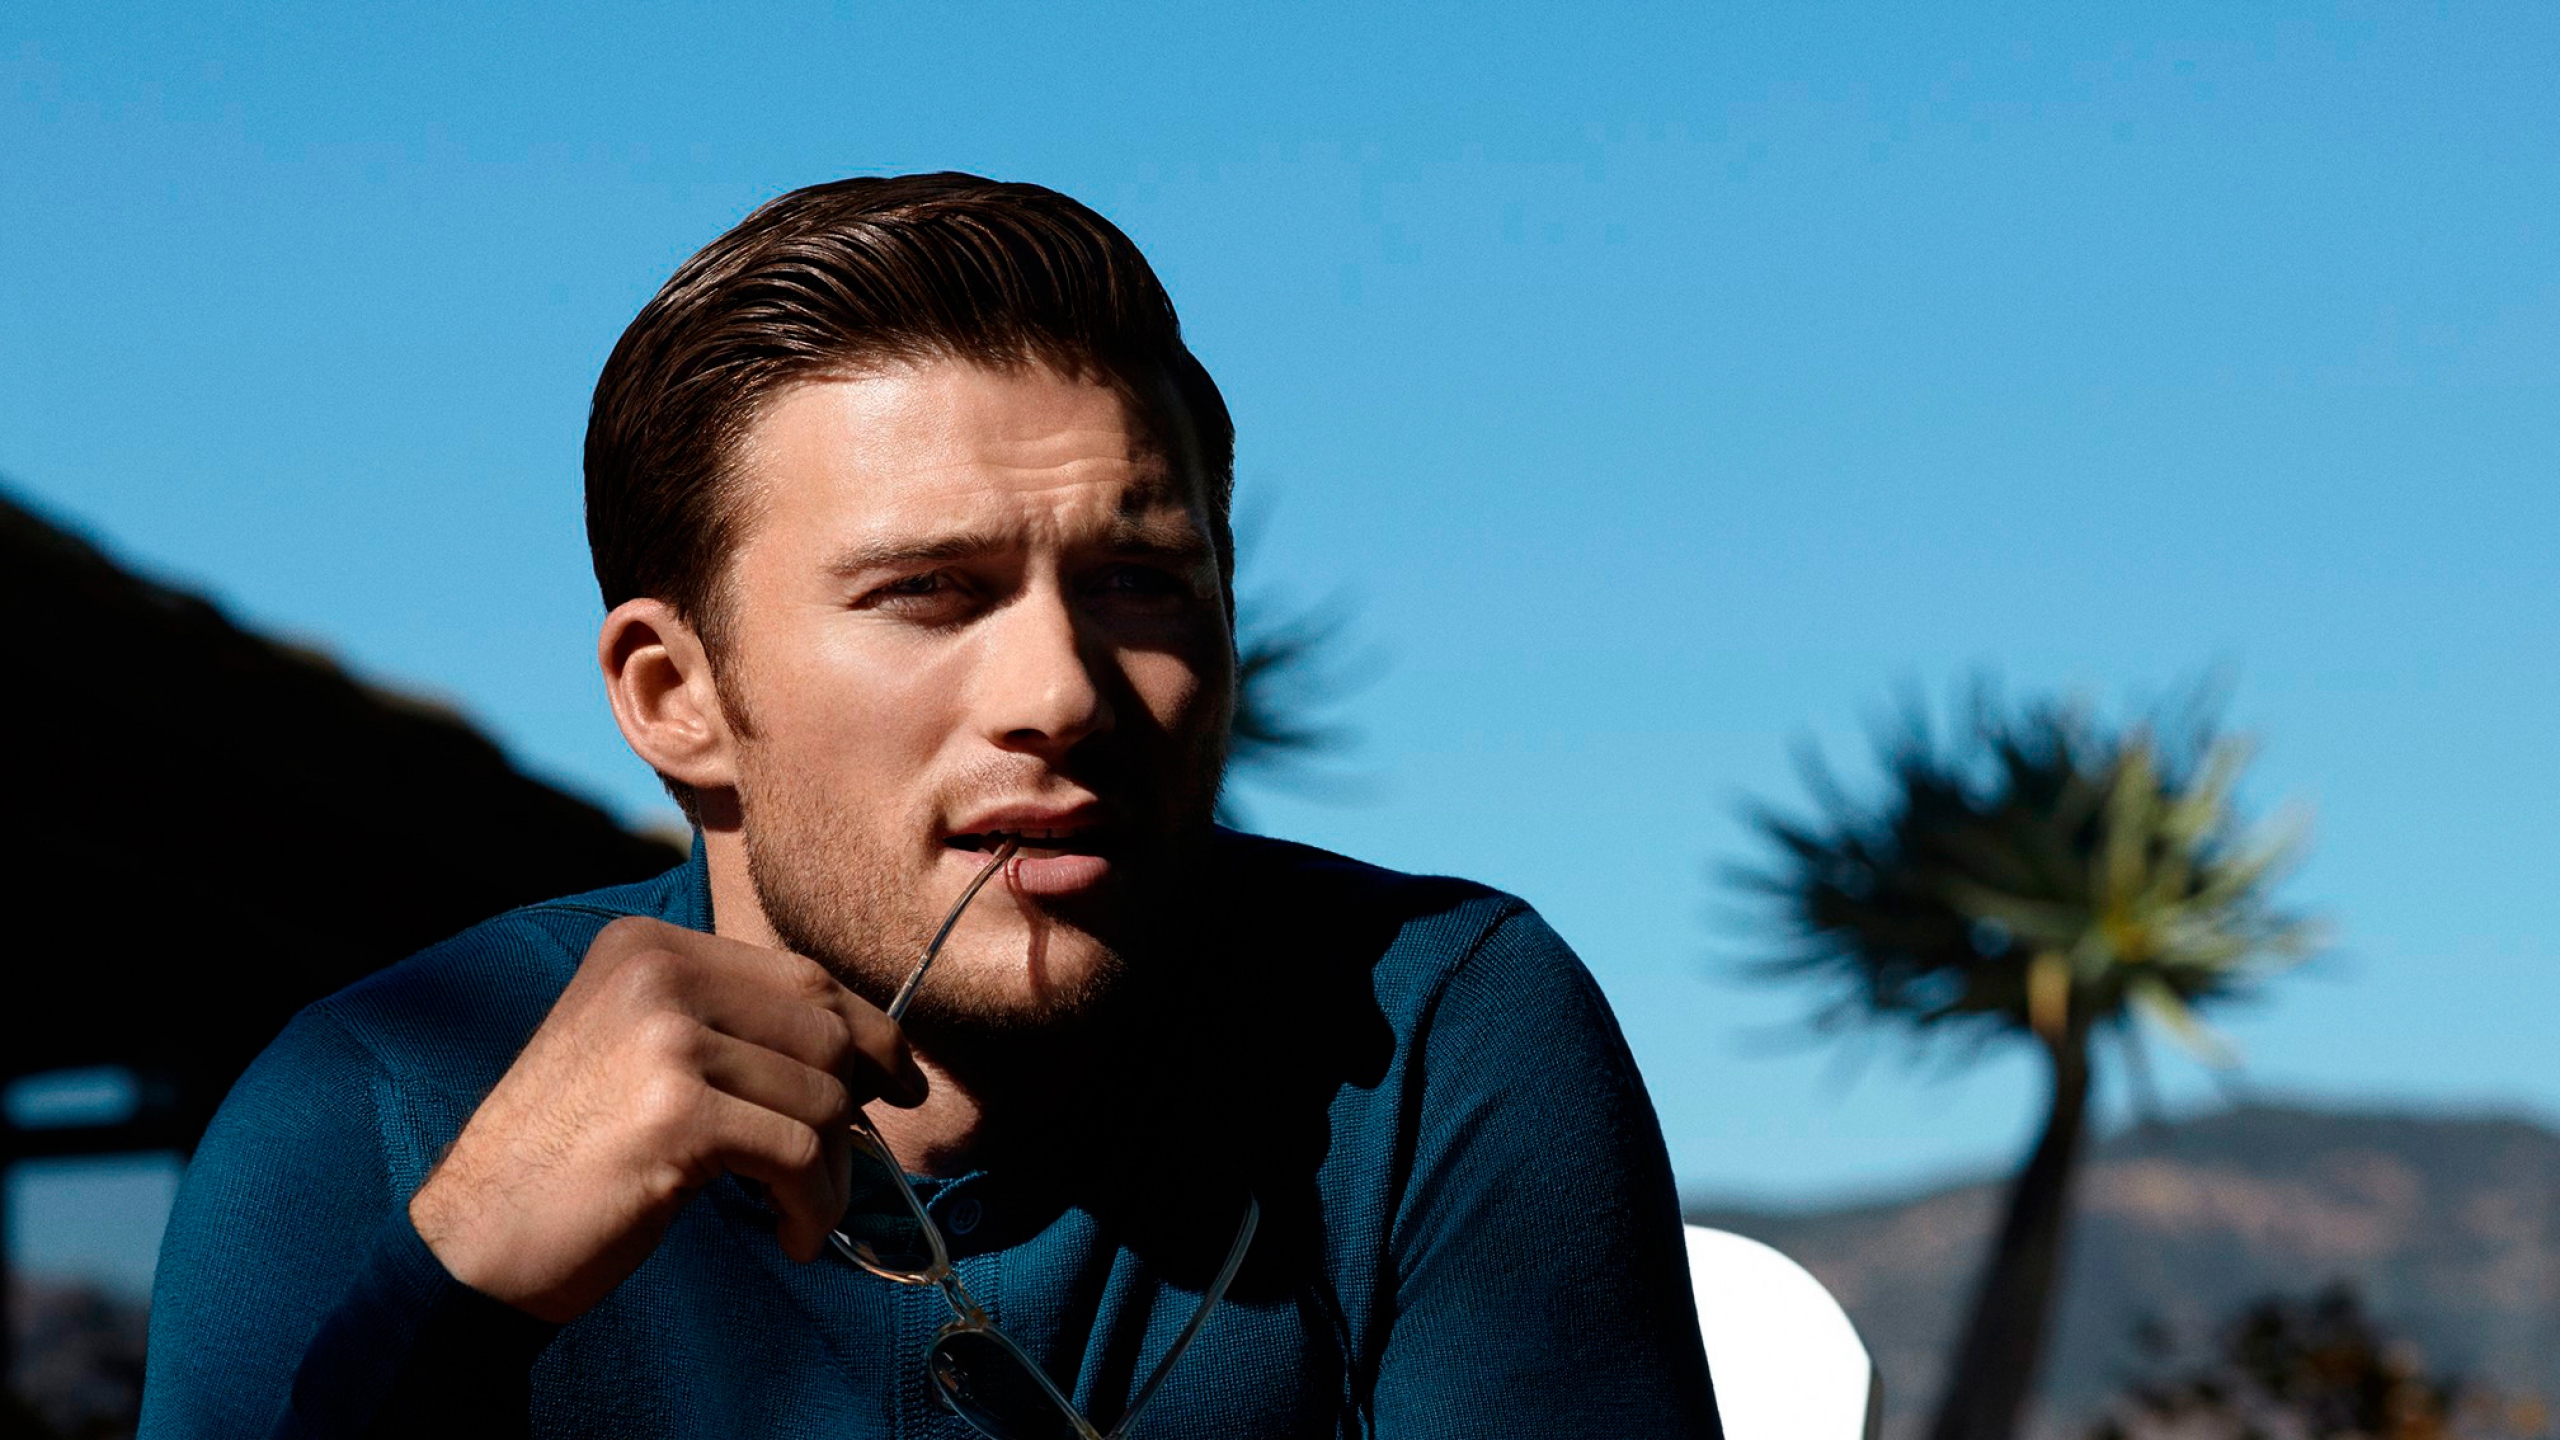 Scott Eastwood Wallpaper High Resolution And Quality